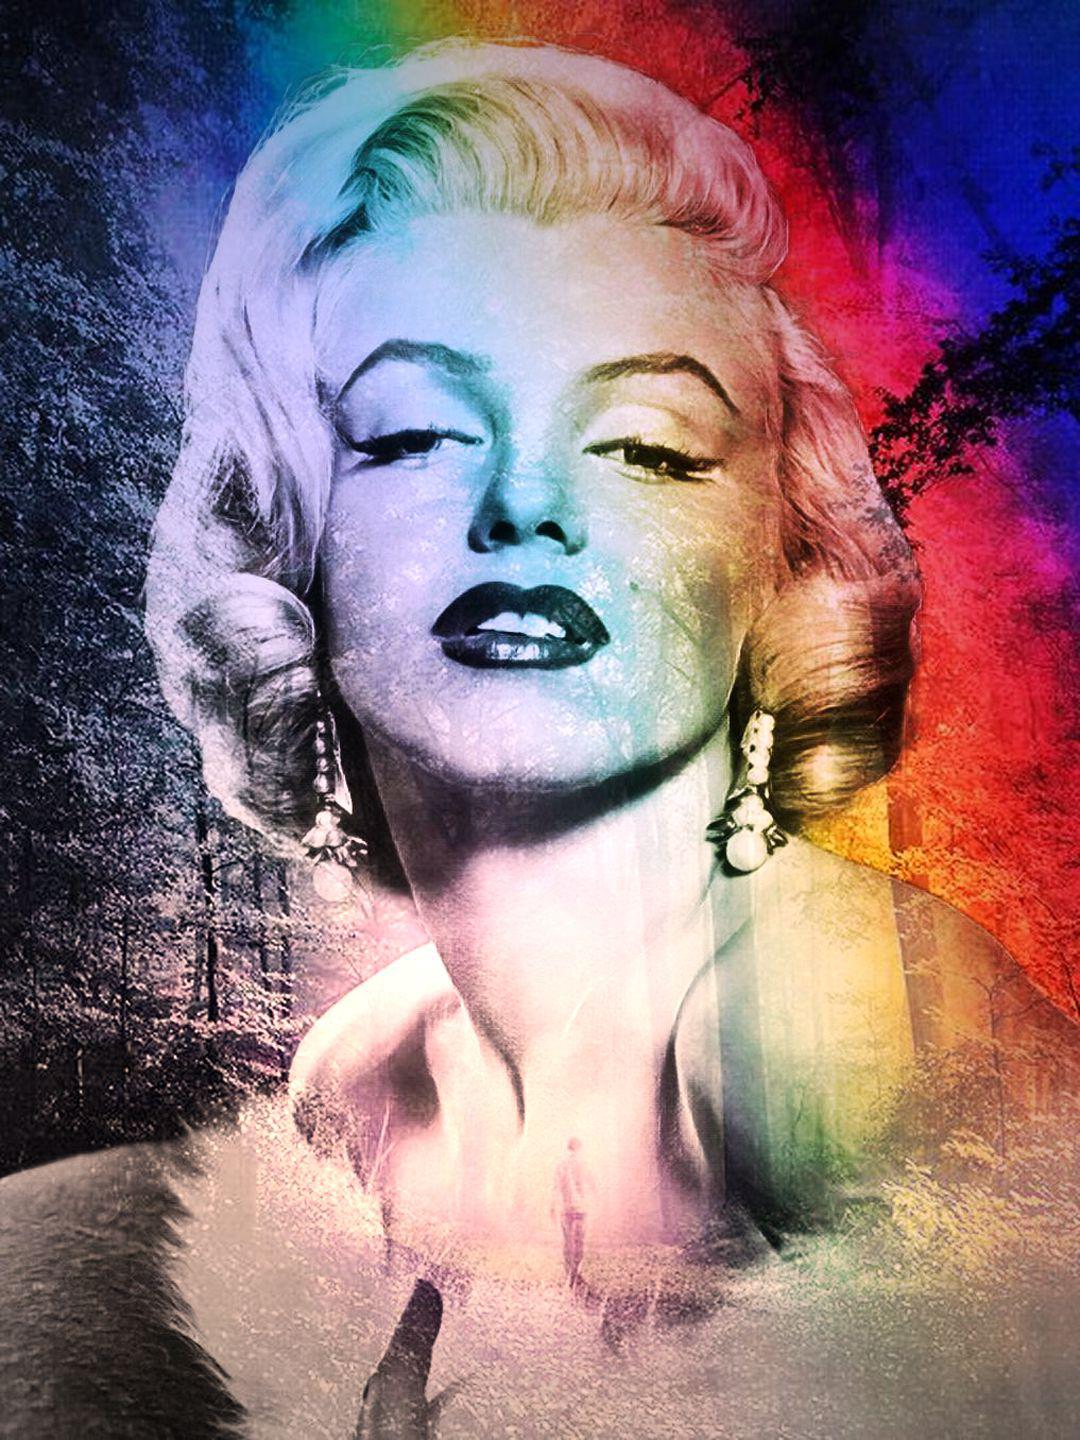 Amber Rose Hot Fucking Tranny - Marilyn Monroe - Celeb ART - Beautiful Artworks of Celebrities,  Footballers, Politicians and Famous People in World | OpenSea